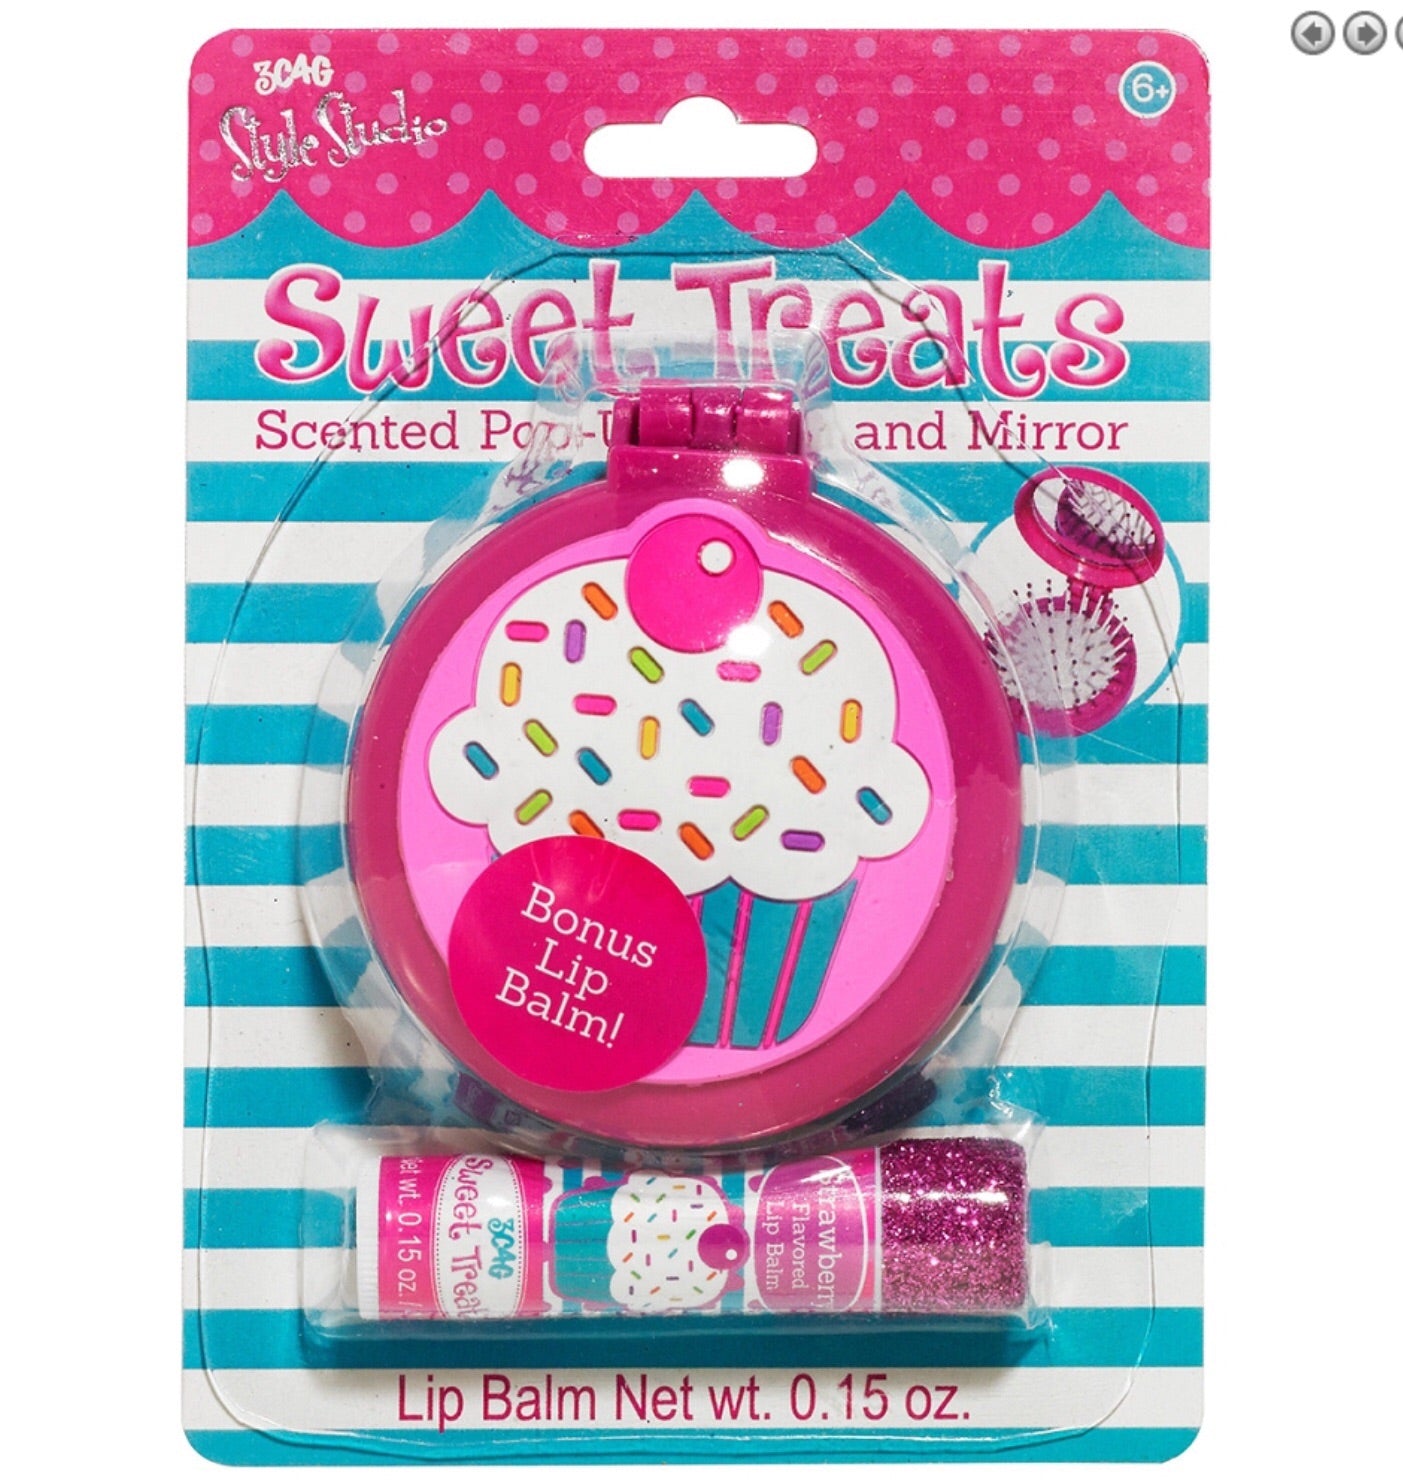 Sweet treats scented pop up brush and mirror with lip balm